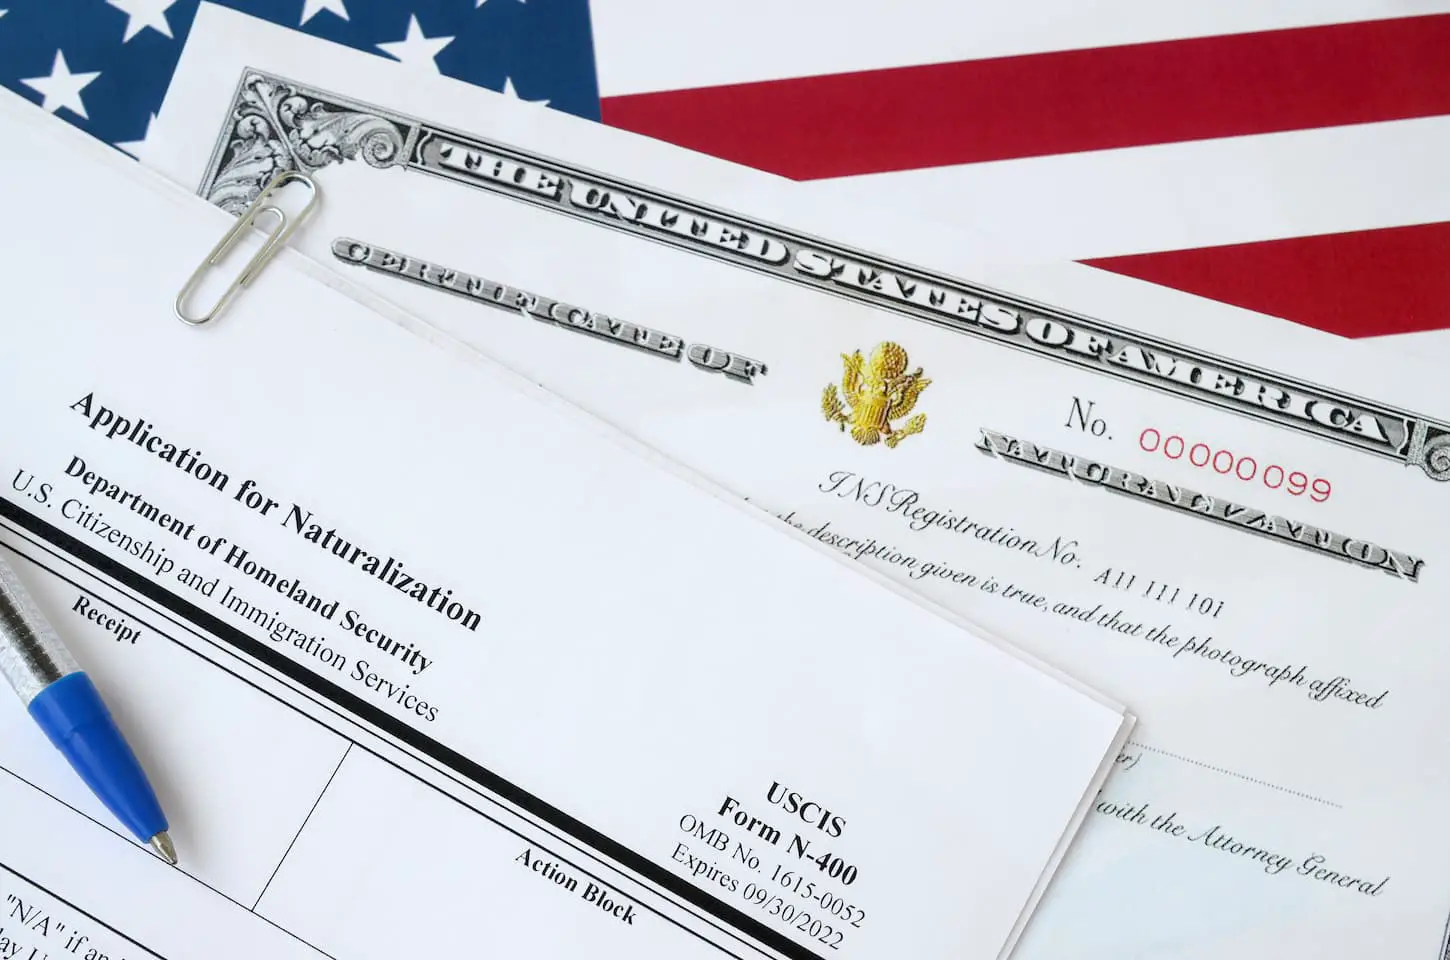 An image of N-400 Application for Naturalization and Certificate of naturalization lies on United States flag.